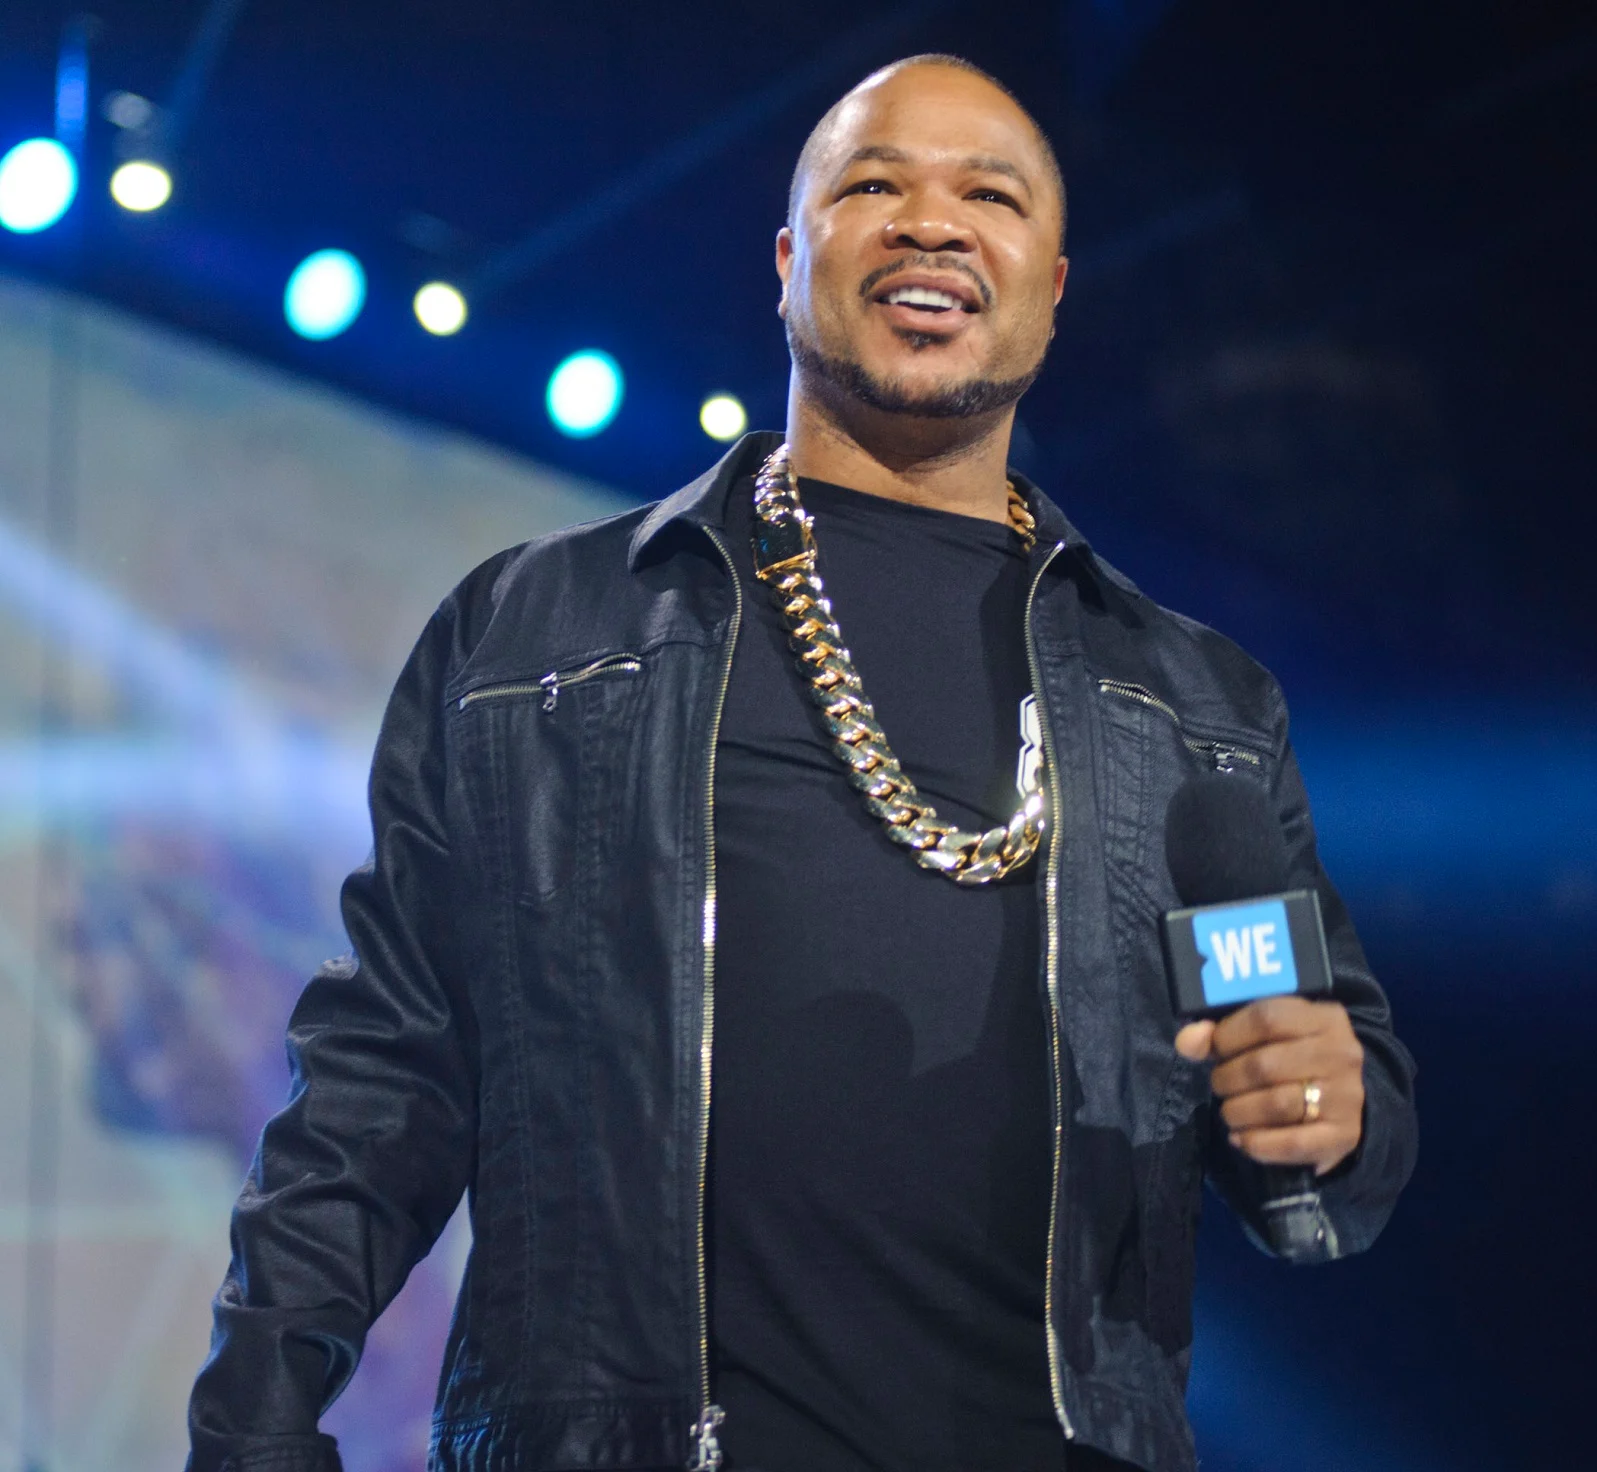 What Is The Net Worth Of Nate Dogg? Xzibit Net Worth $500 Thousand